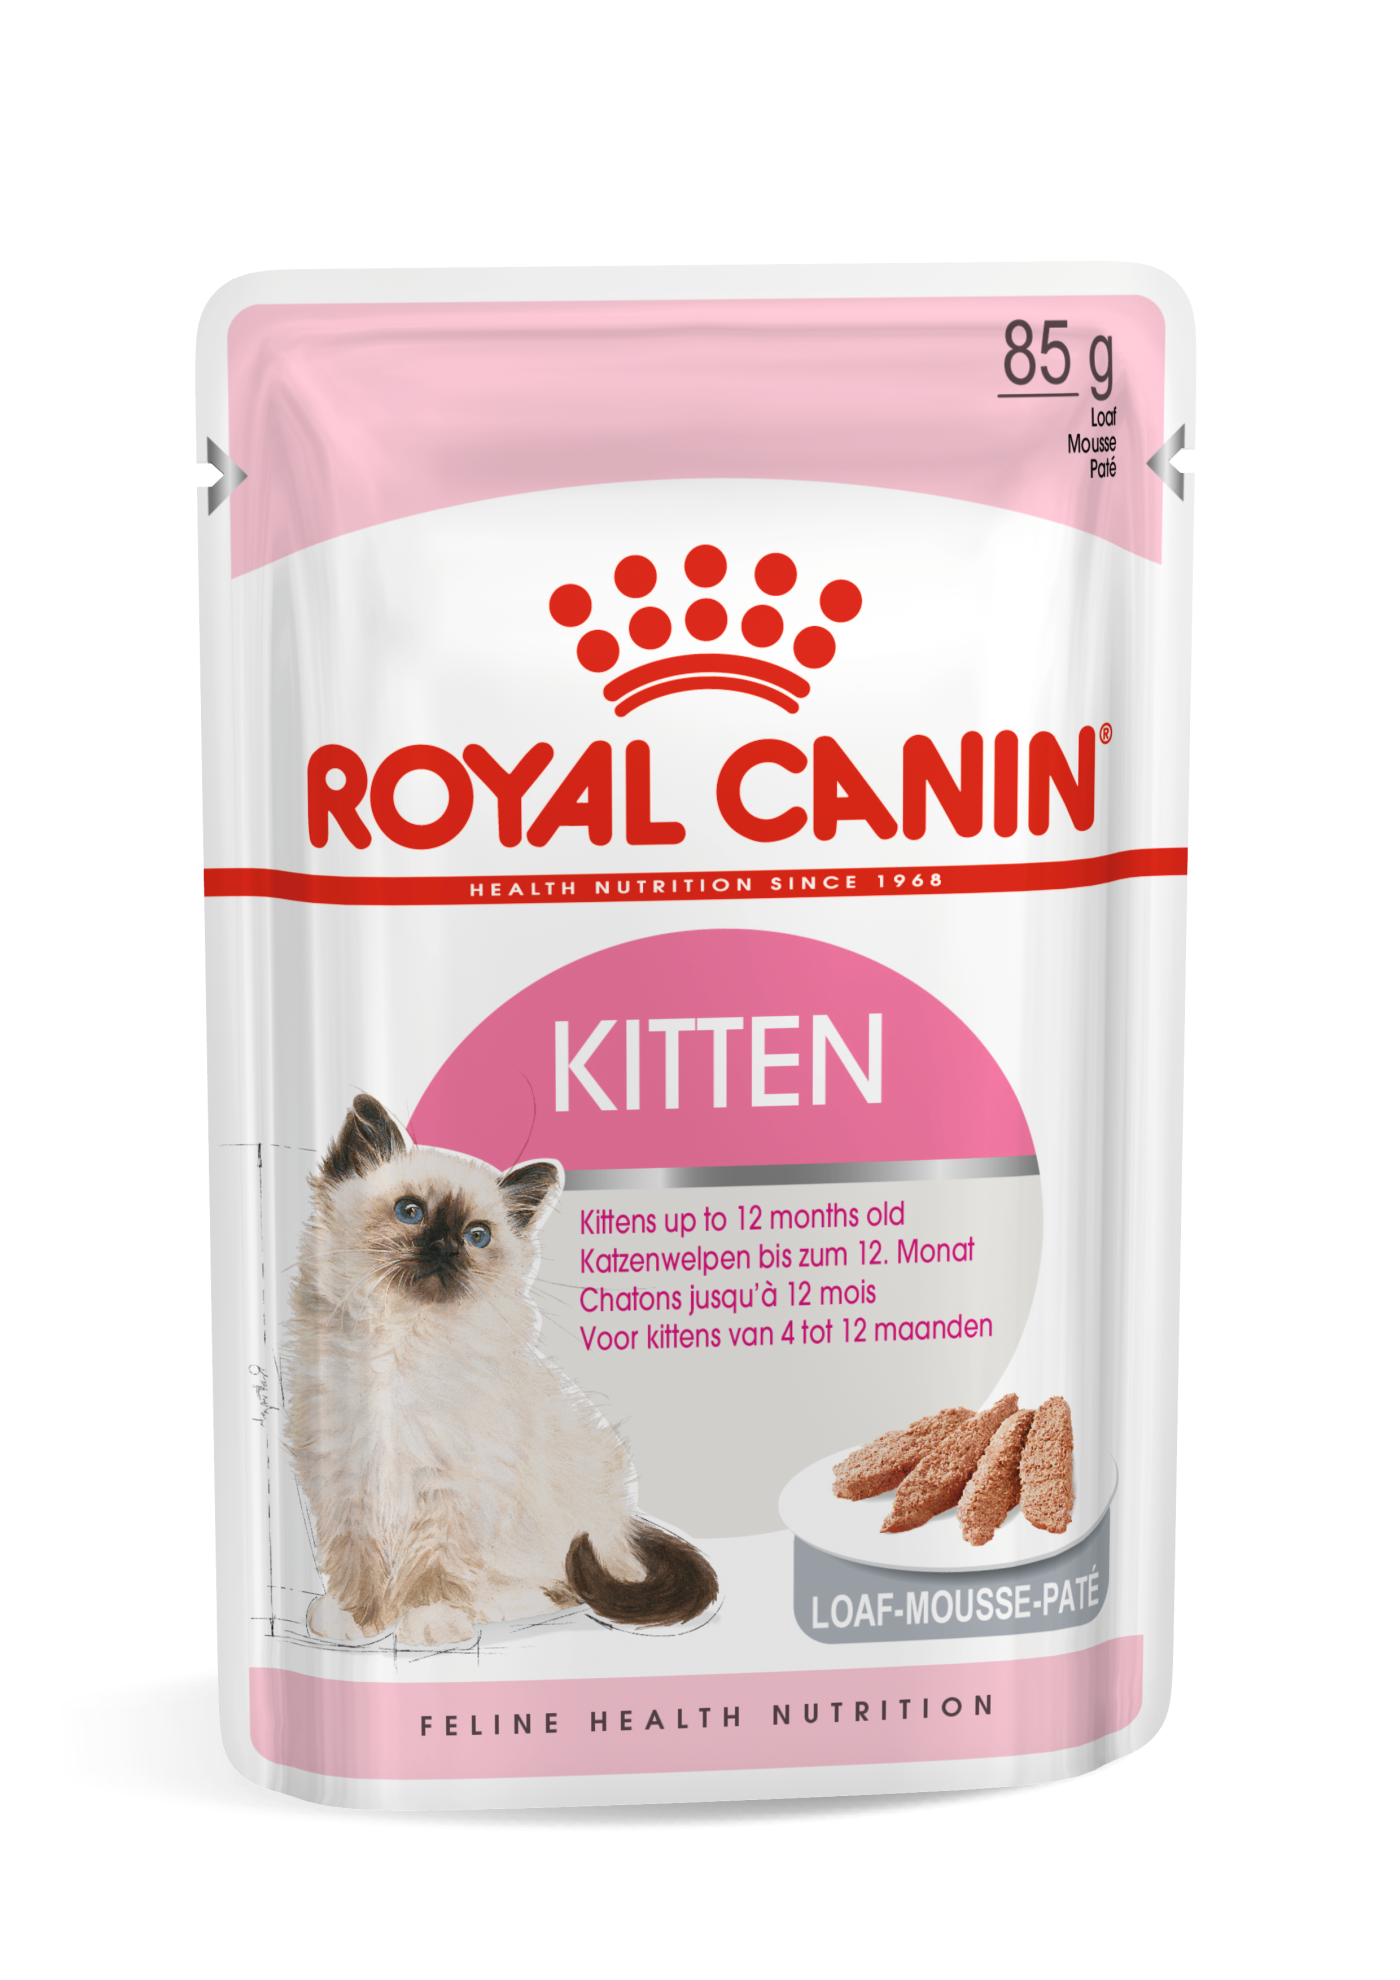 royal canin mousse